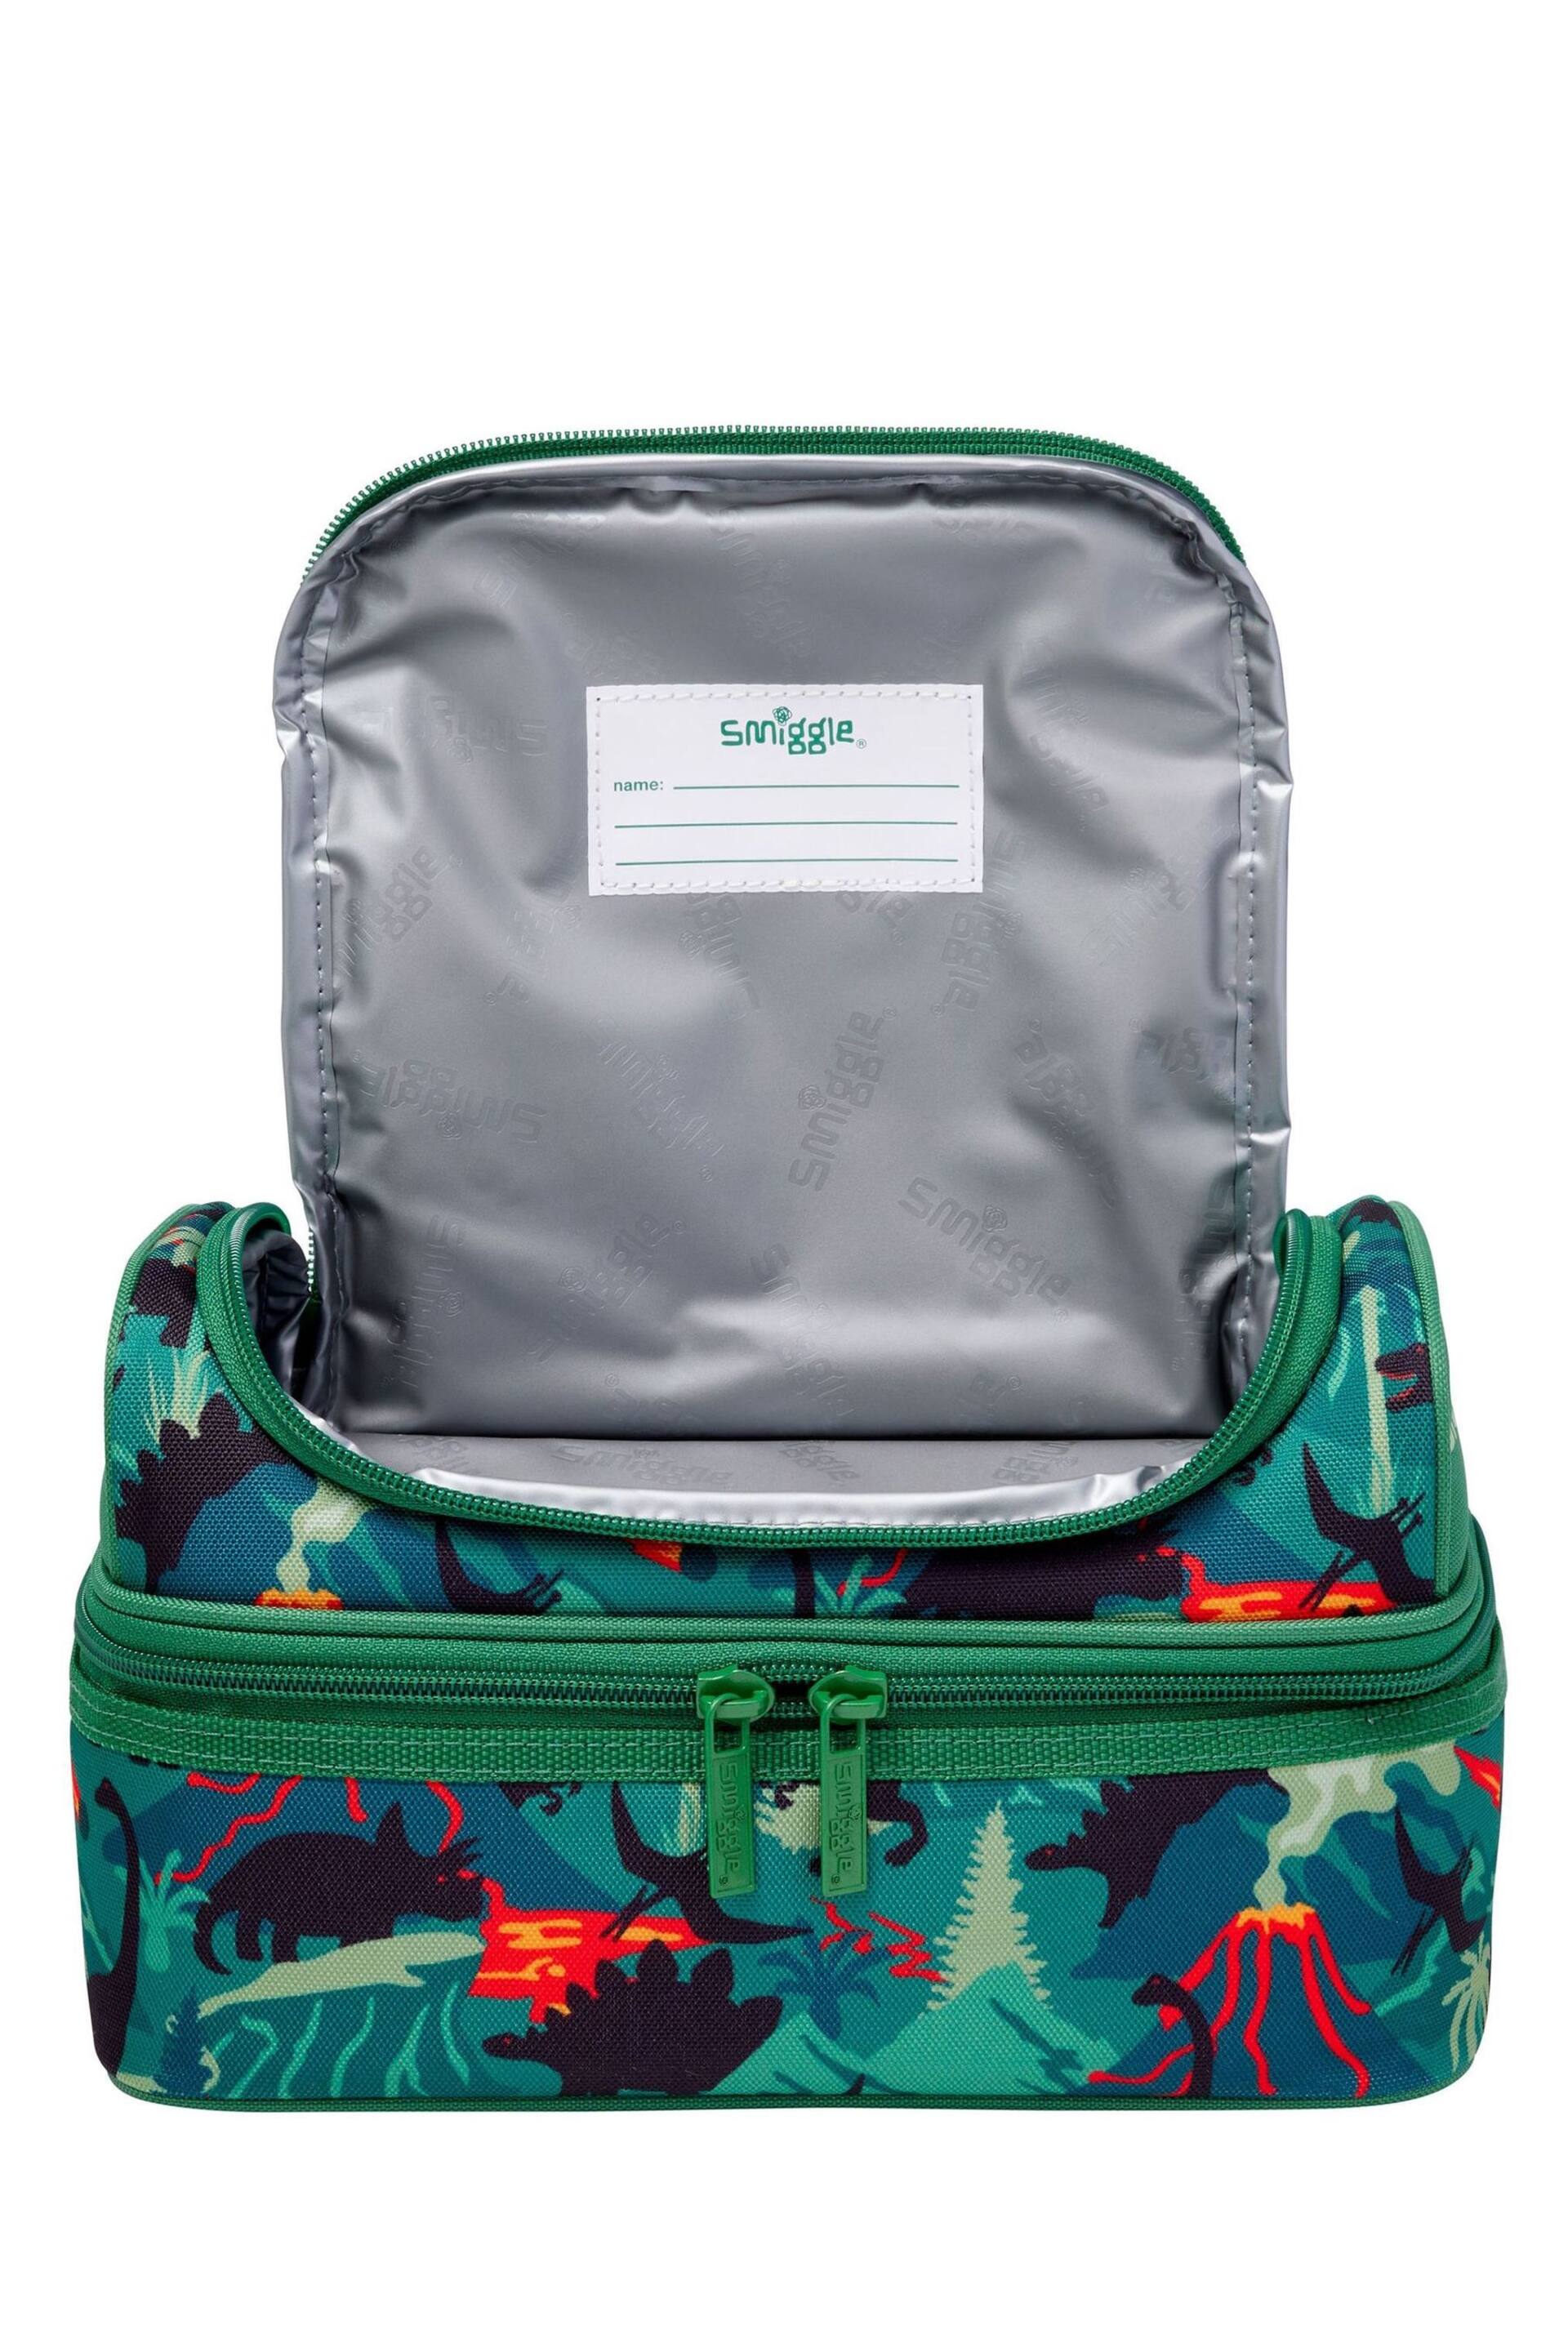 Smiggle Green Vivid Double Decker Lunchbox - Image 2 of 3